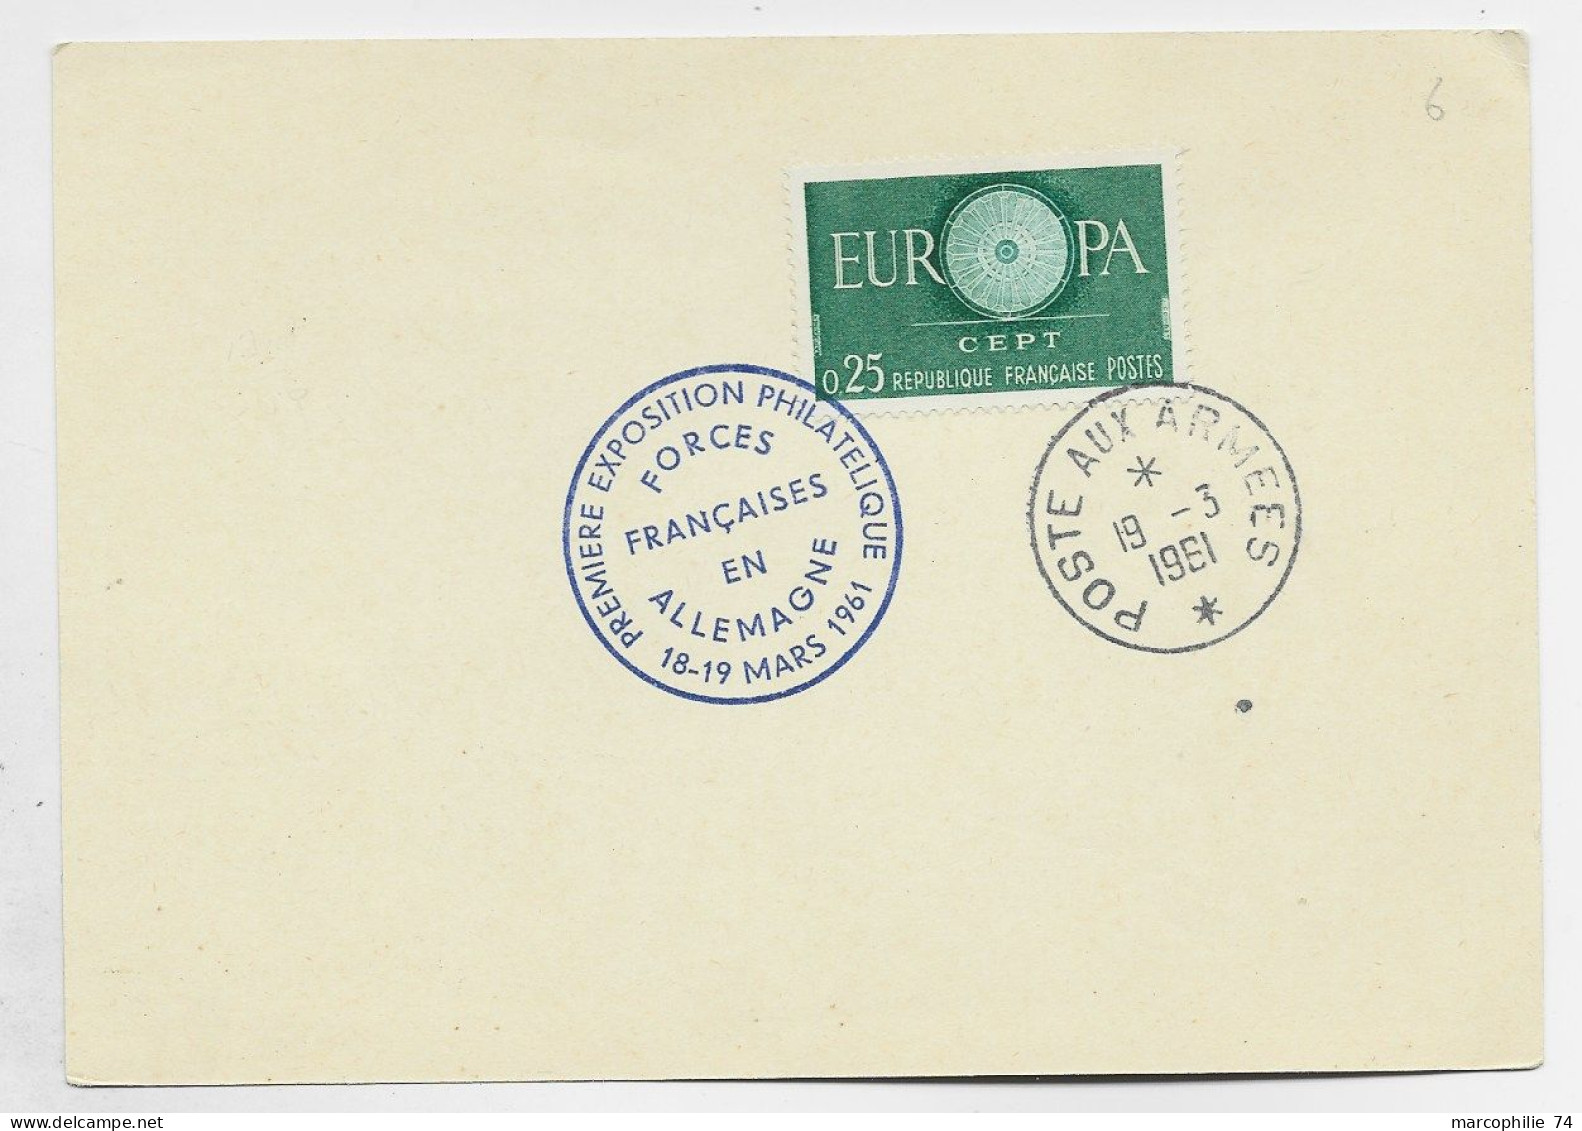 FRANCE EUROPA 25C POSTE AUX ARMEES 19.3.1961 + PREMIER EXPO PHIL FORCES FRANCAISES EN ALLEMAGNE 18 19 MARS AU RECTO CP - Military Postmarks From 1900 (out Of Wars Periods)